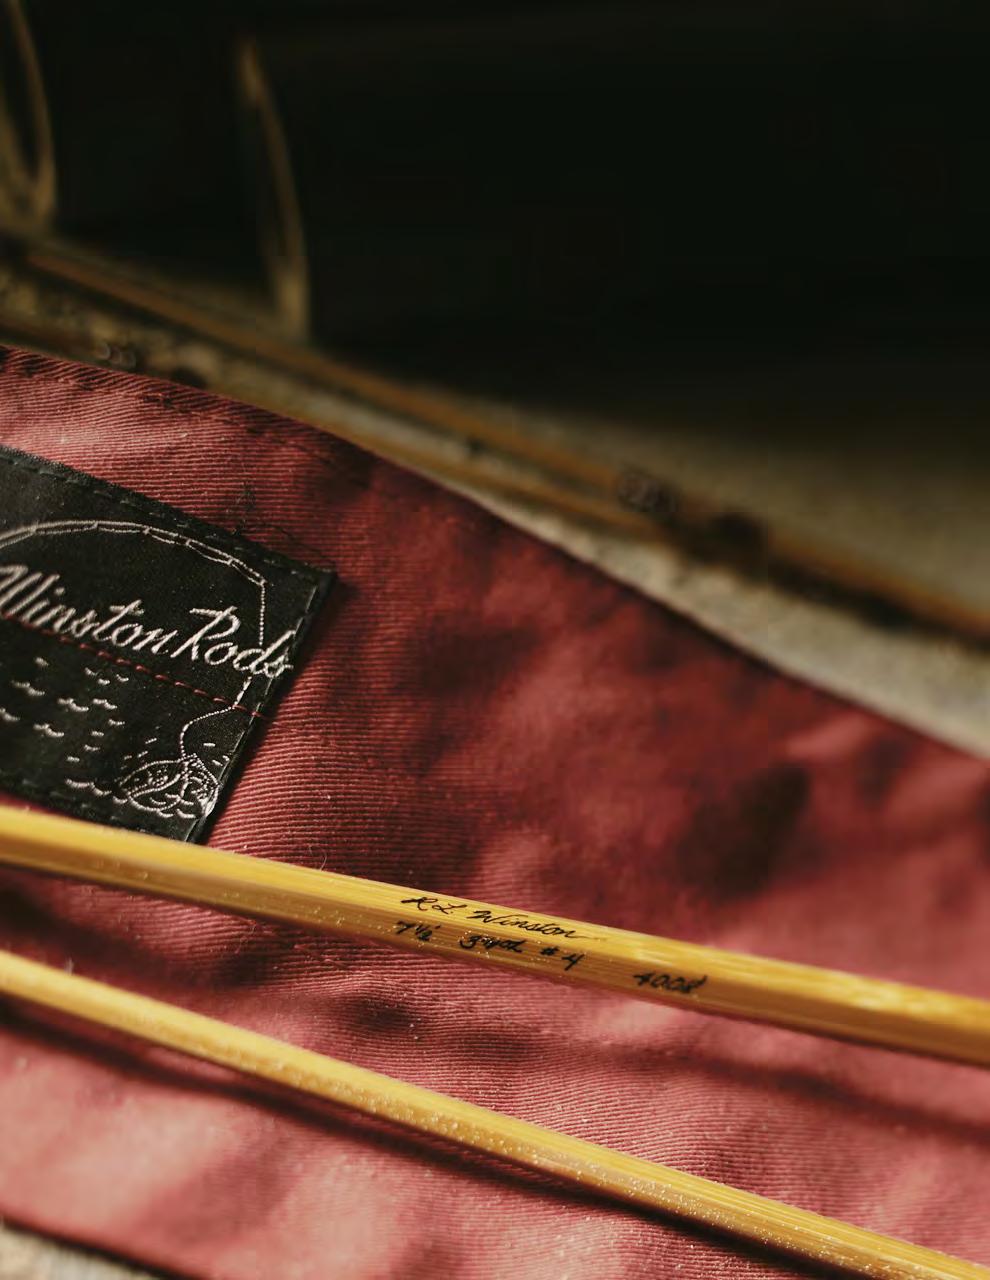 Winston has been making BAMBOO rods since 1929, when Robert Winther and Lew Stoner first began innovating using split bamboo cane.